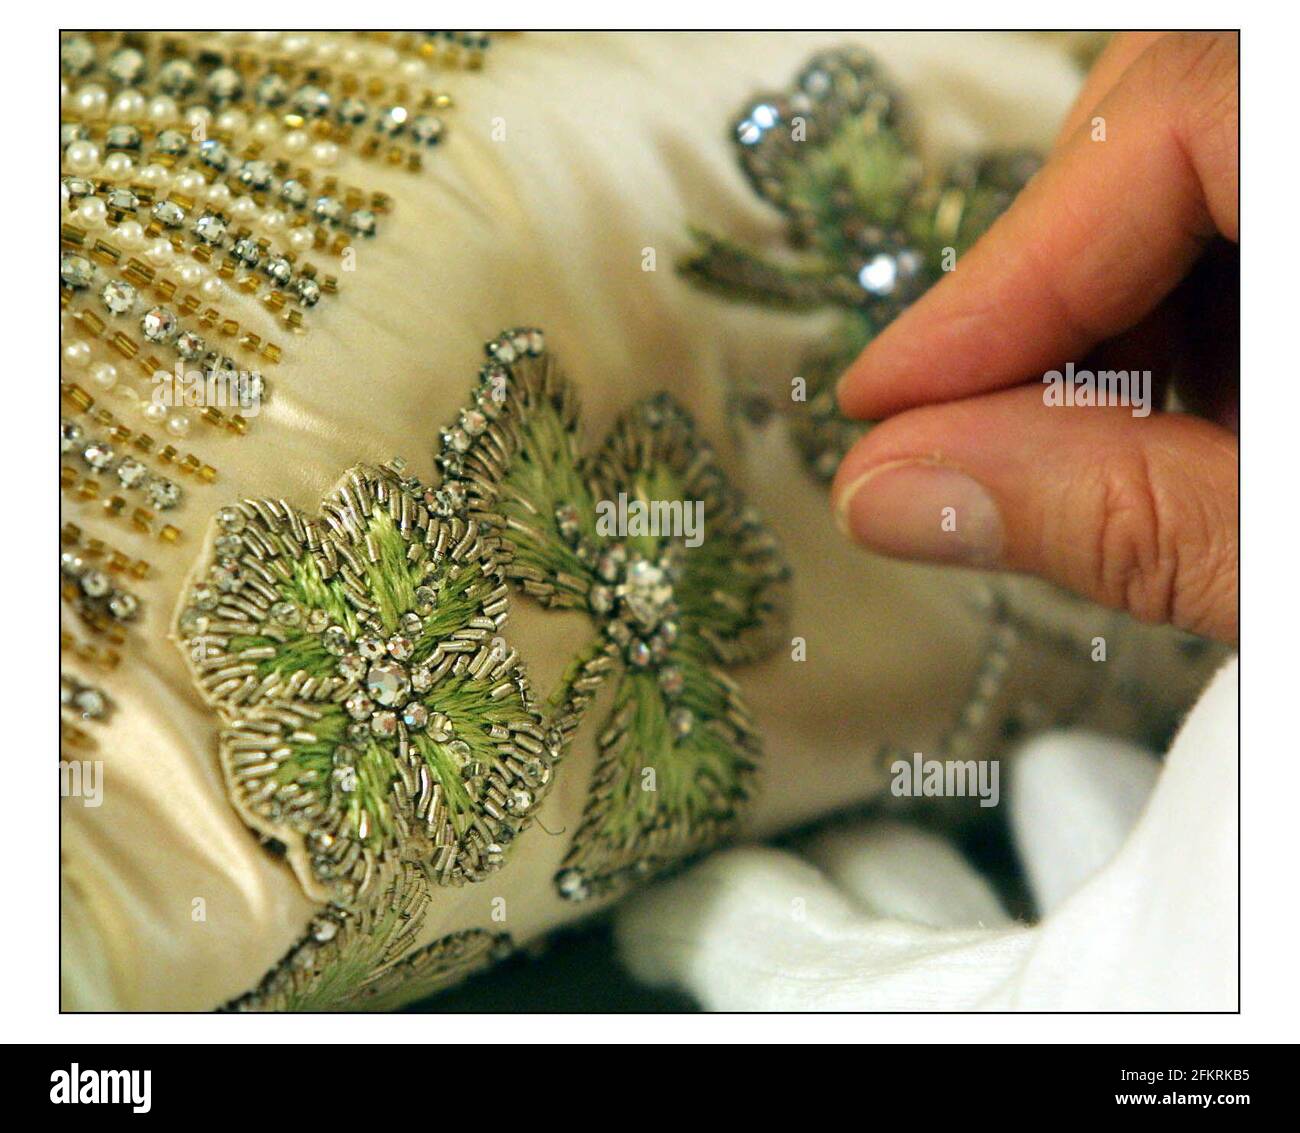 The 50th anniversary of the Coronation of Queen Elizabeth ll will be celebrated at this year's Summer Opening of Buckingham Palace State Rooms with the display of Her Majesty's magnificent Coronation Dress, seen being prepared by Janet Wood, senior textile conservator at Hampton Court Palace. An extra Shamrock (four leaf clover) added by sir Norman Hartwell the designer of the dress......pic David Sandison 30/5/2003 Stock Photo